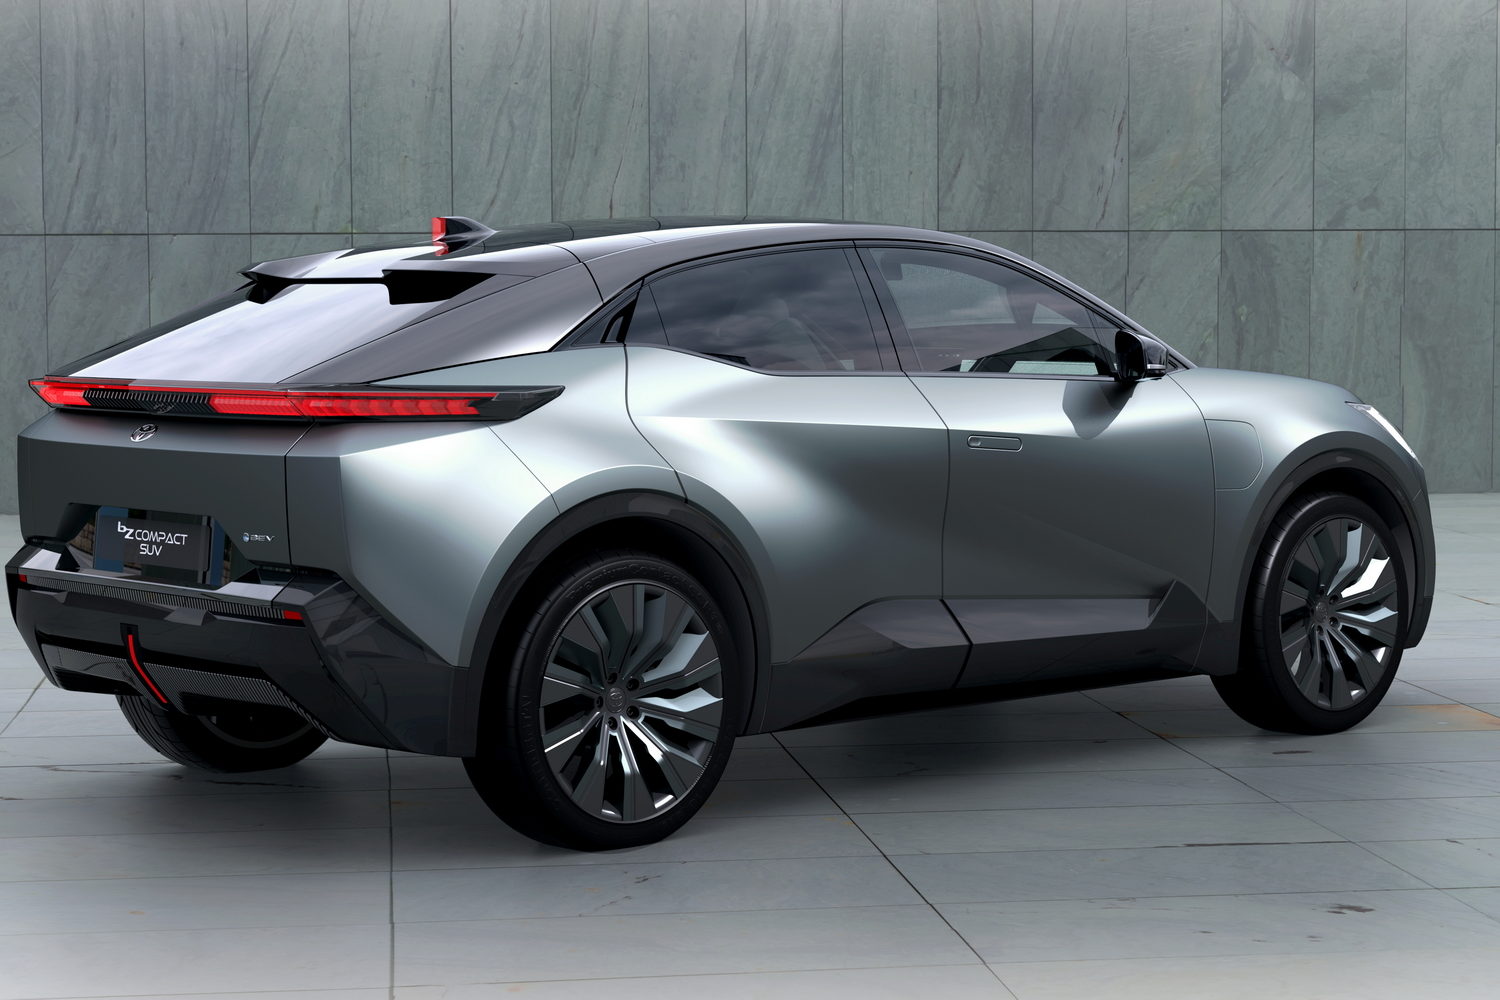 Toyota bZ compact is an electric C-HR